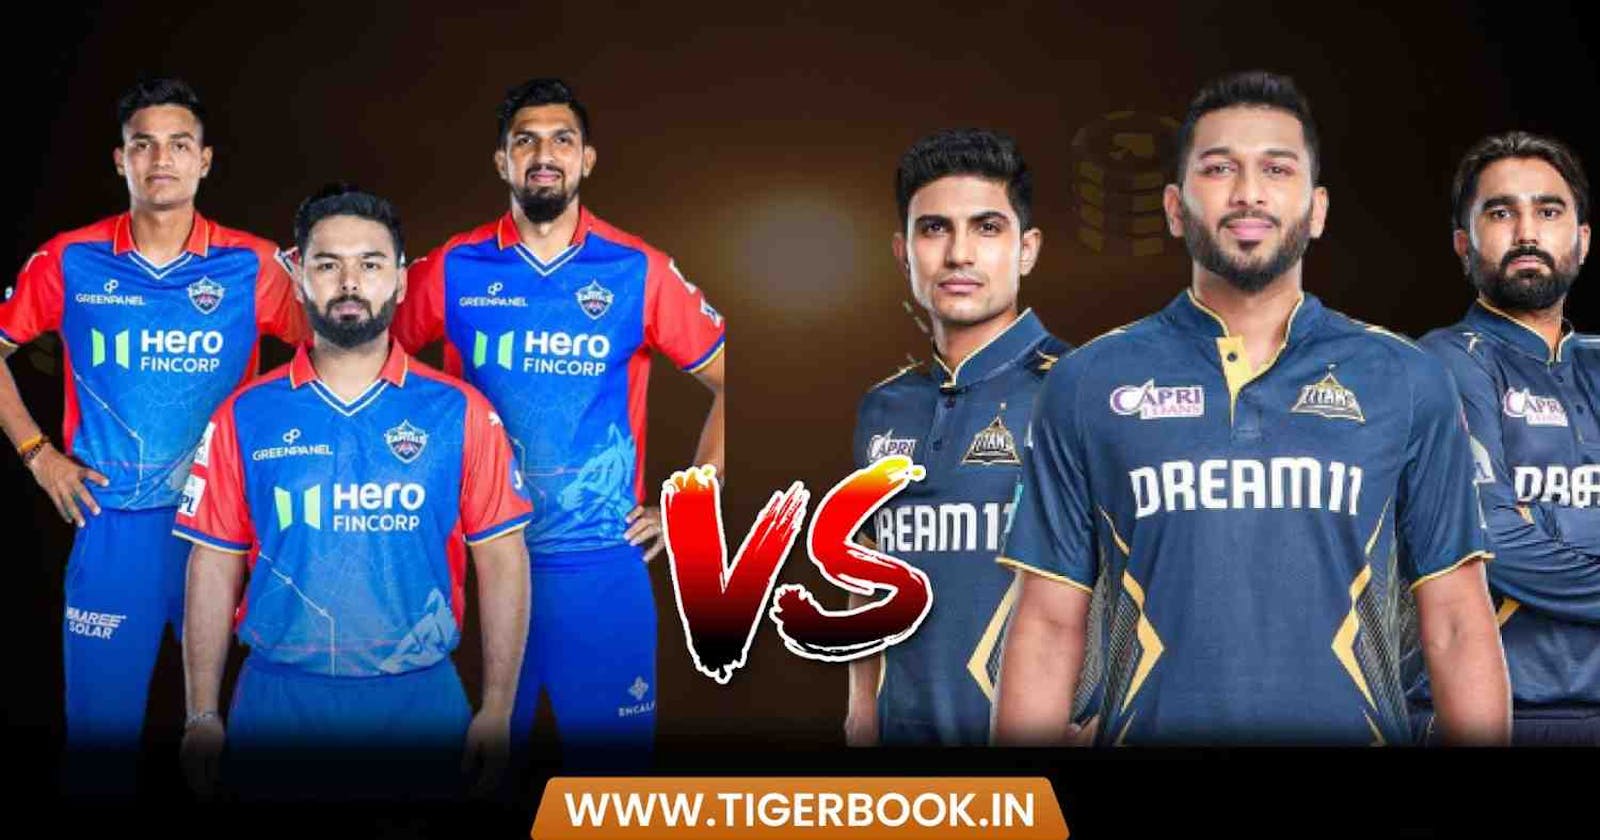 Mastering Safe and Responsible Online Cricket Betting: Insights from Tiger Book